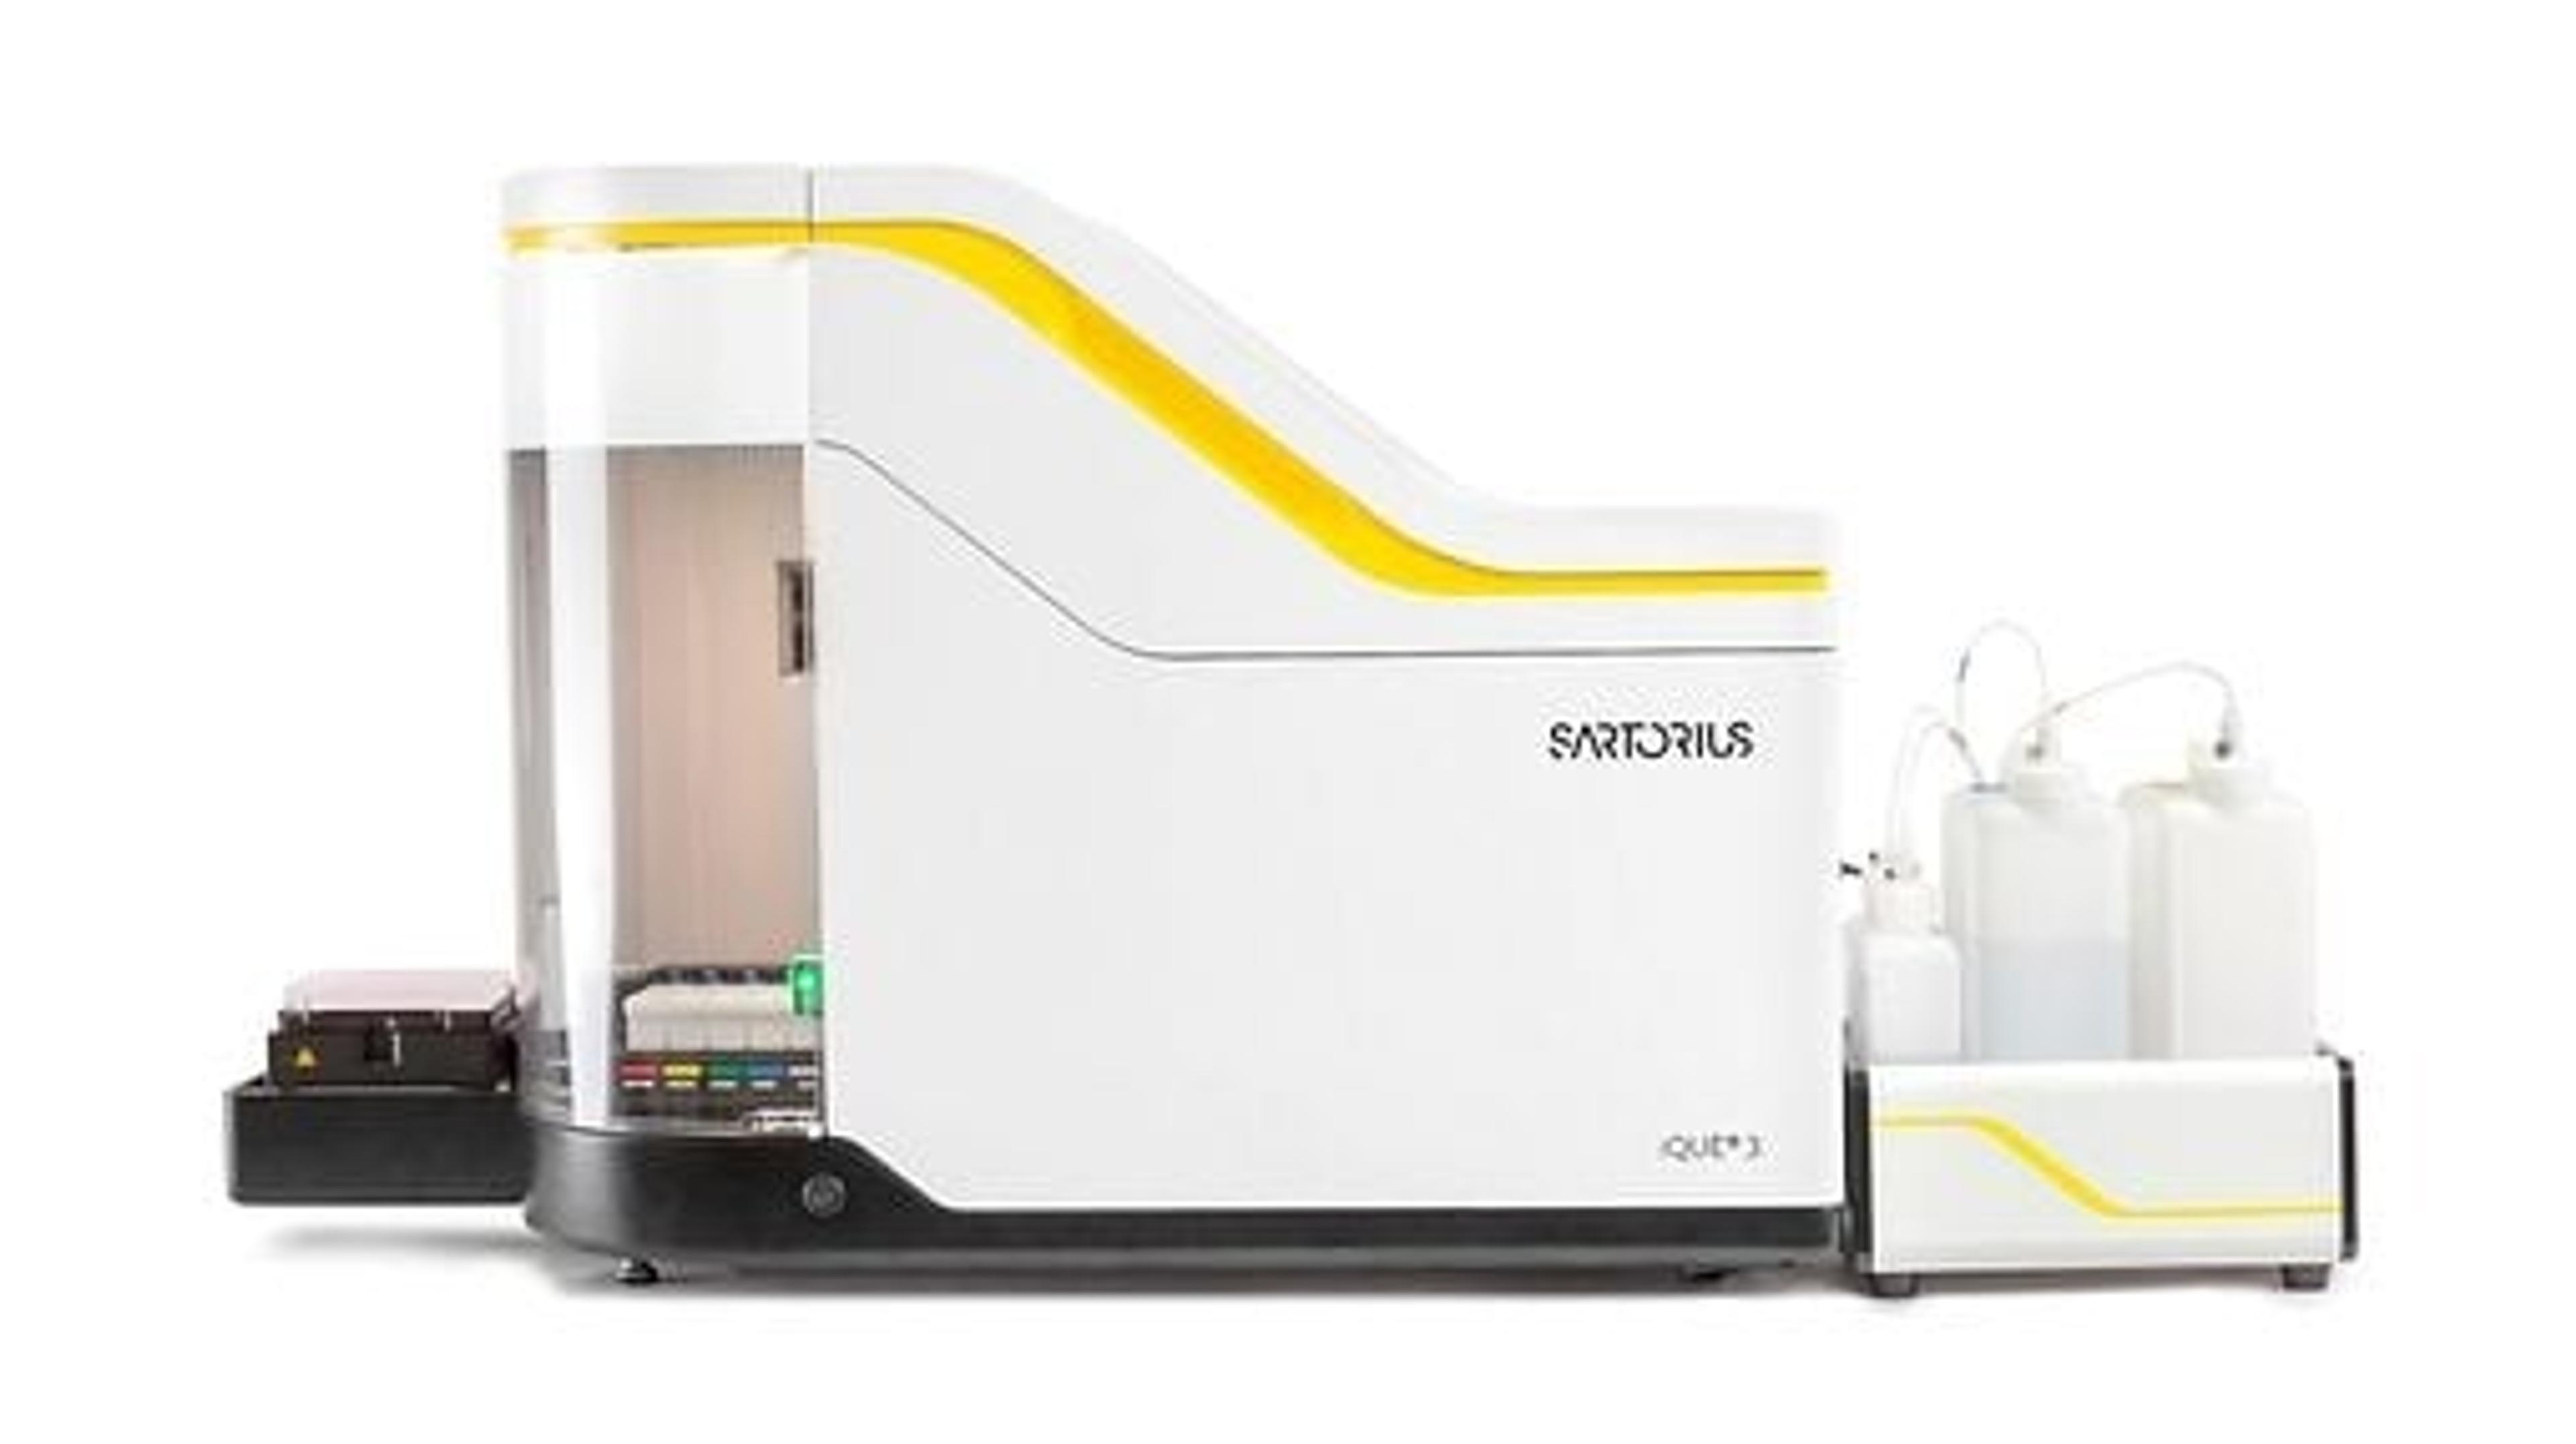 iQue ®  HTS by Cytometry Platform